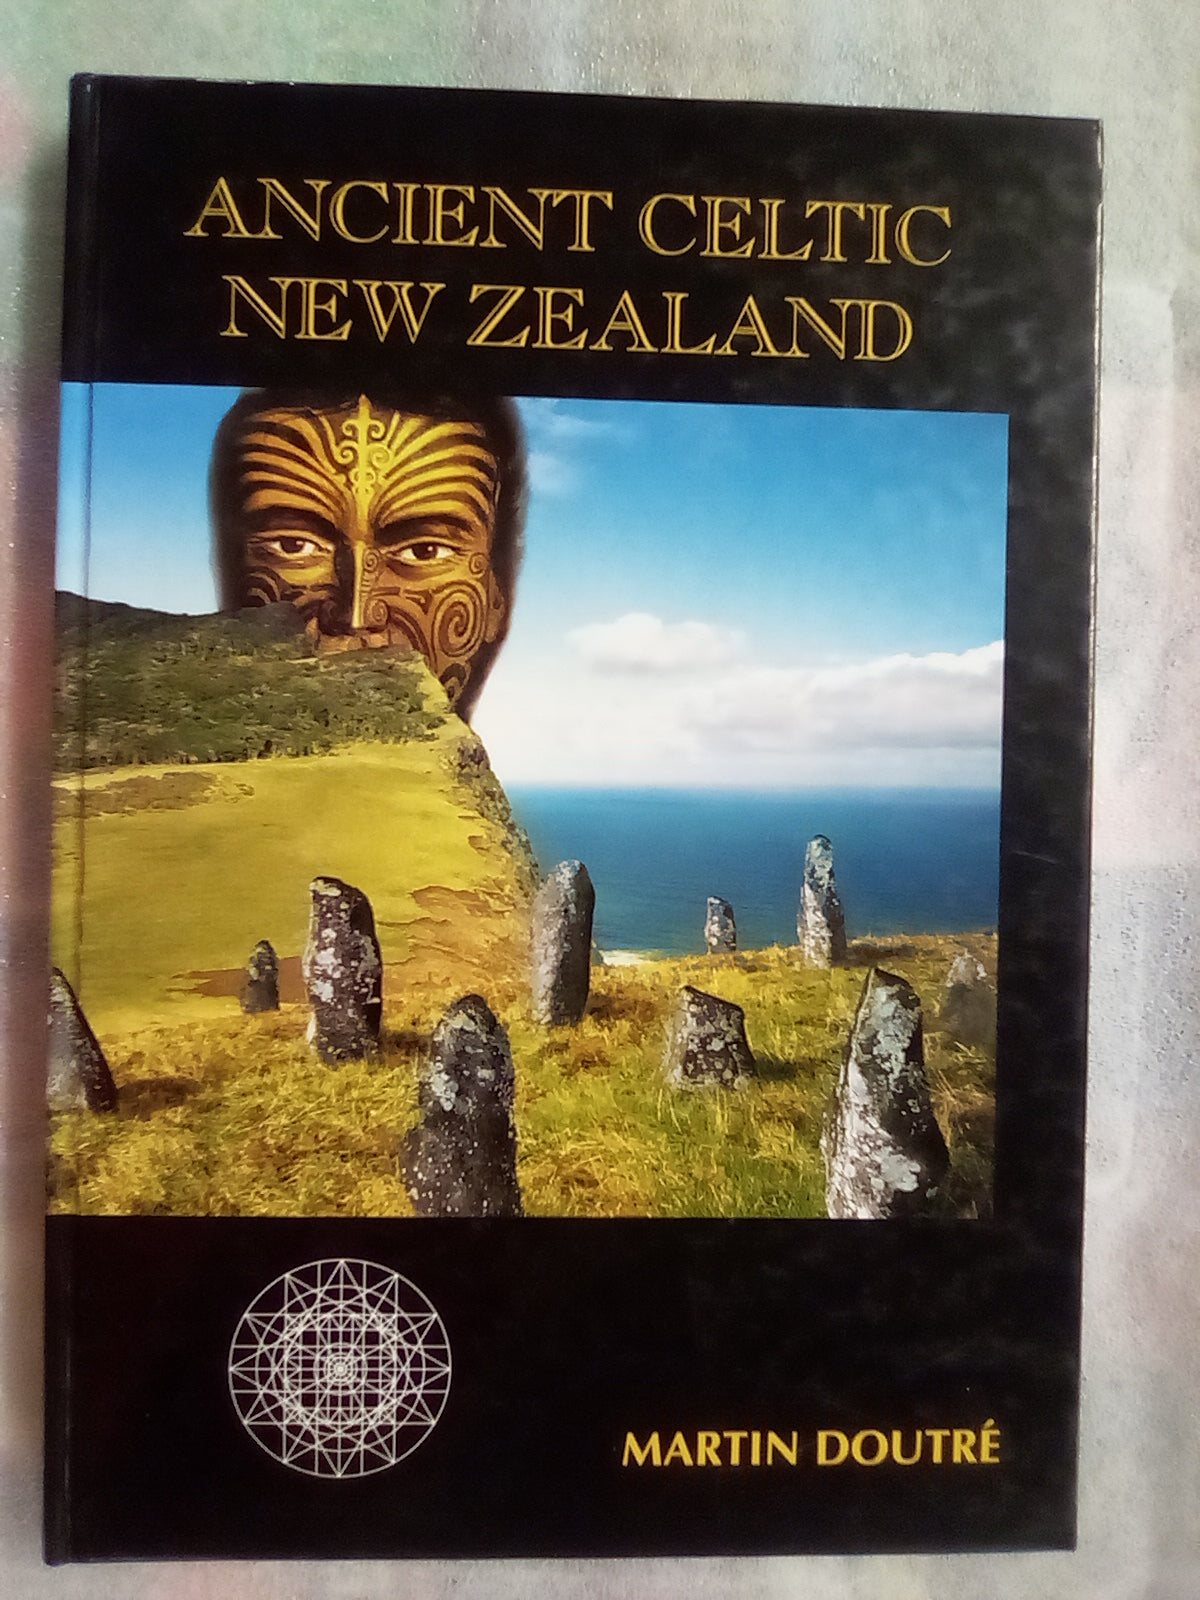 Ancient Celtic New Zealand by Martin Doutre